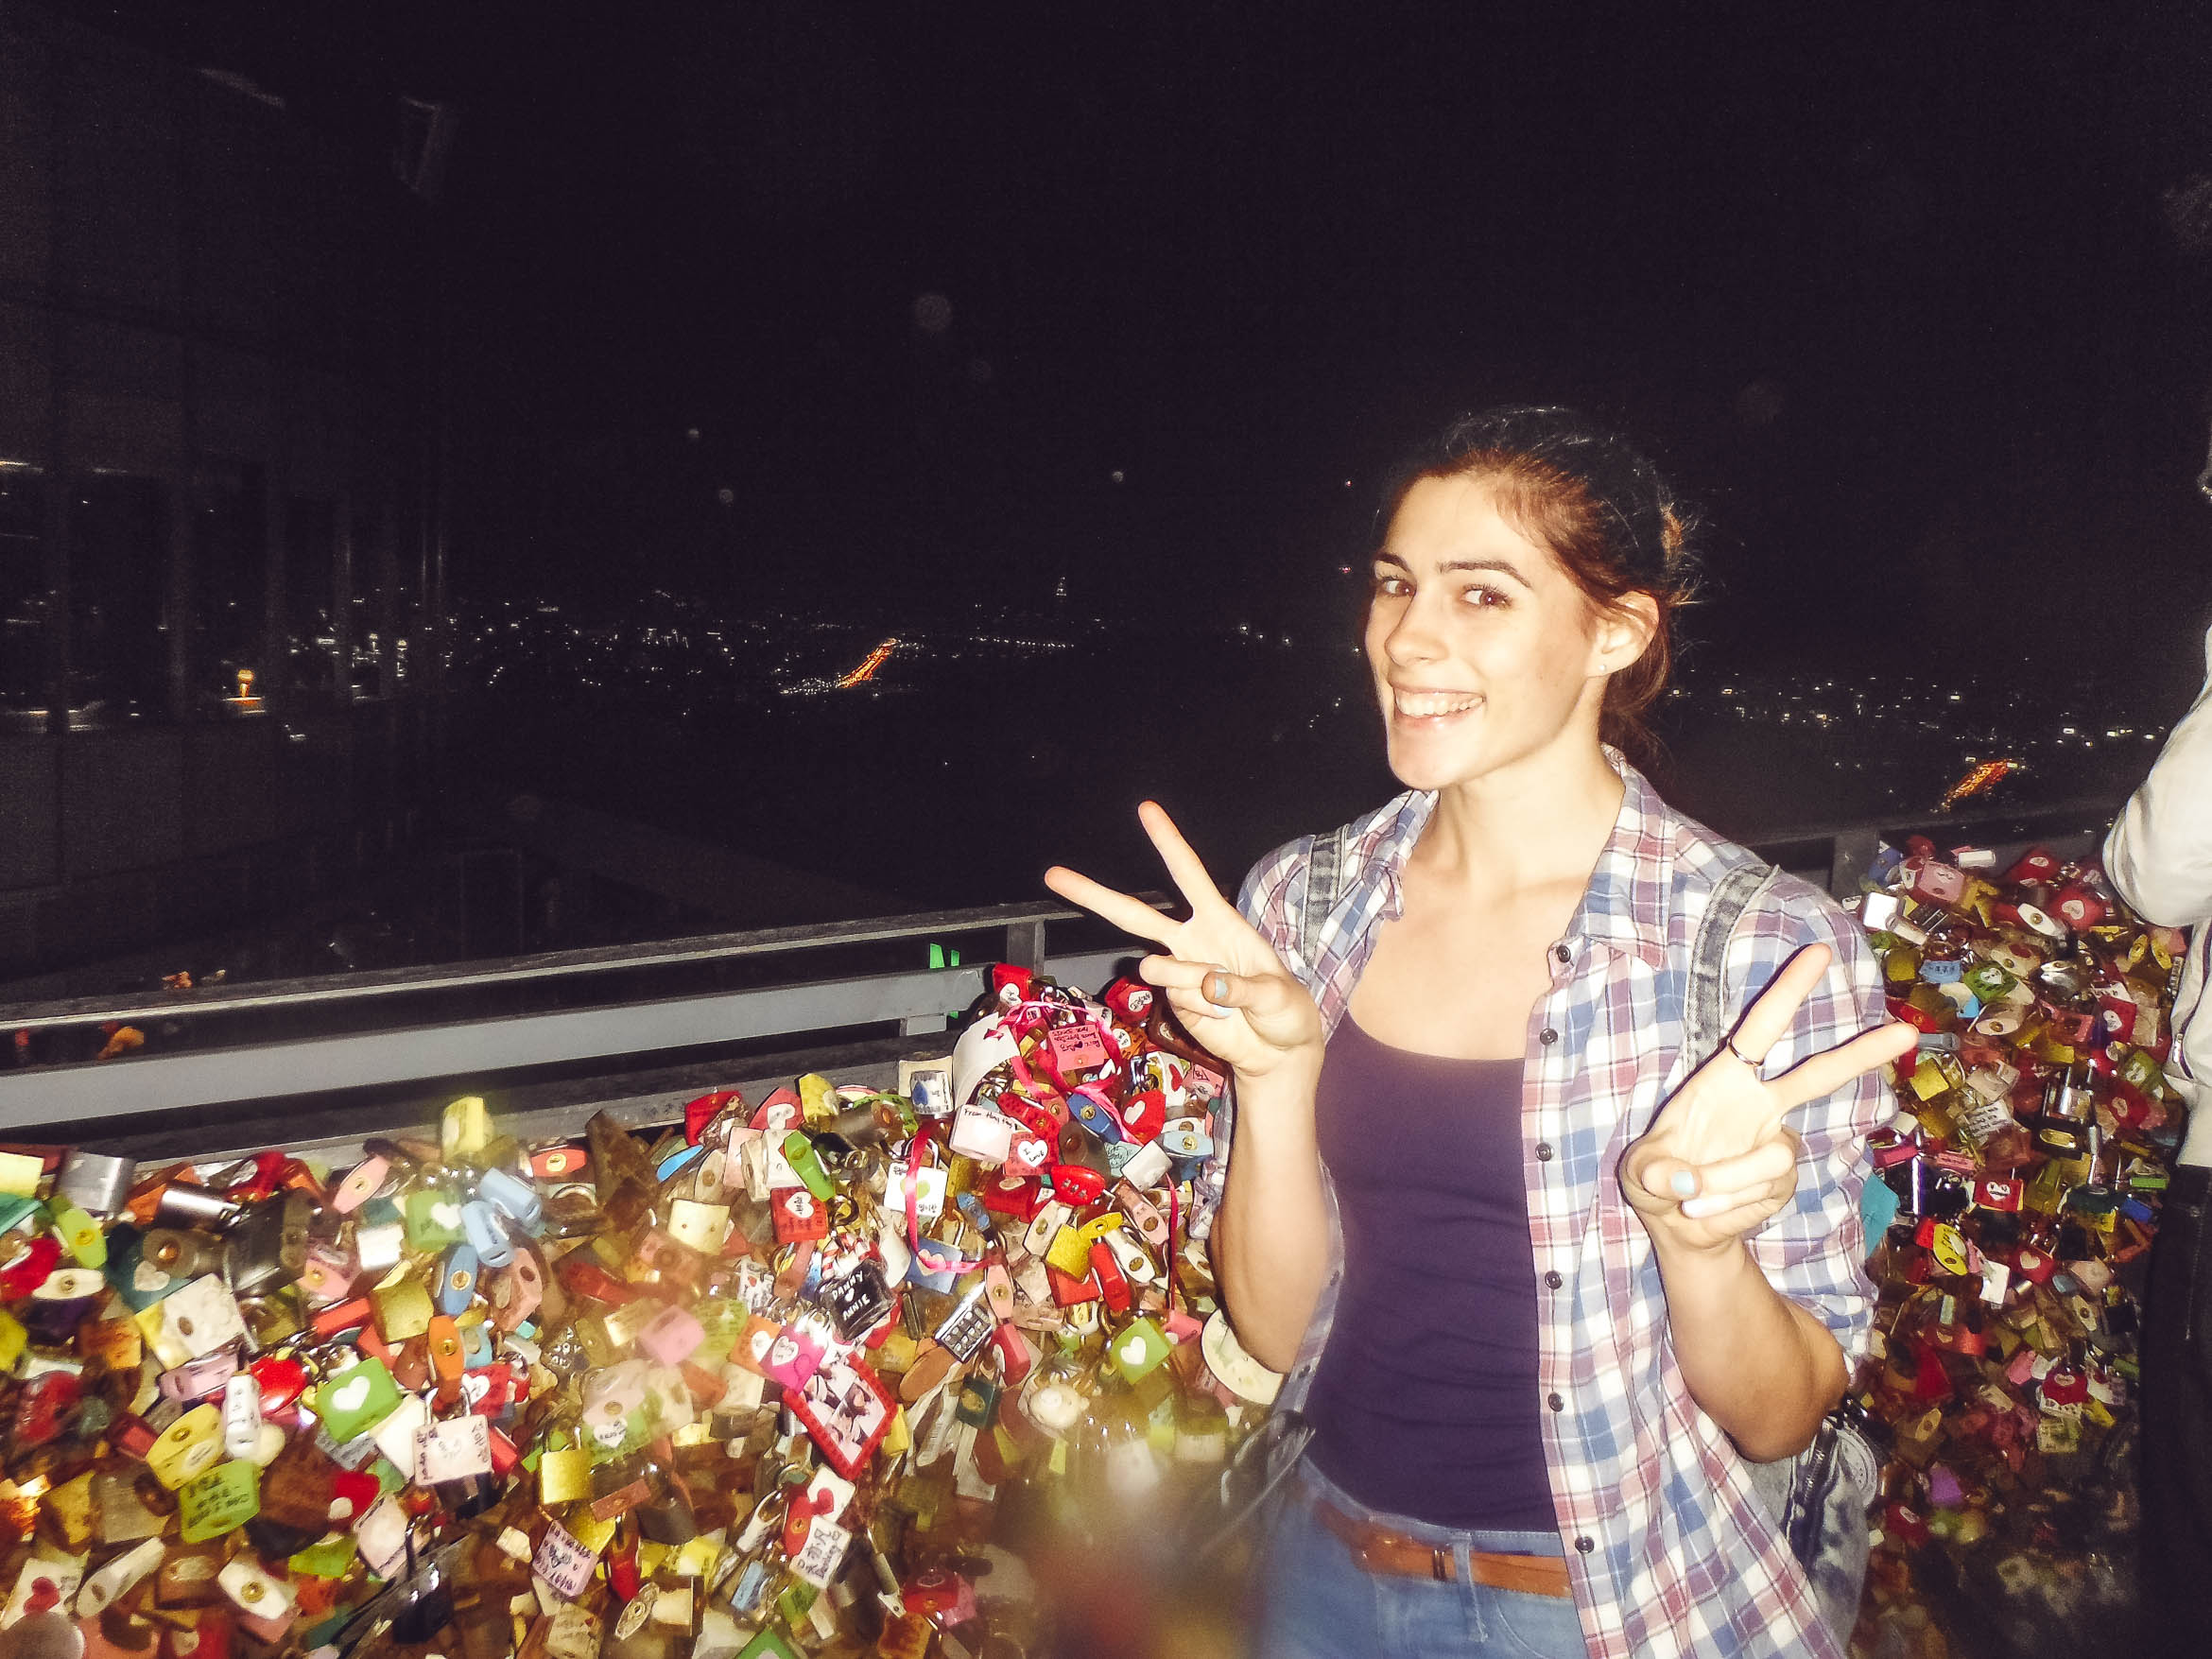 smiling in front of padlocks at N tower